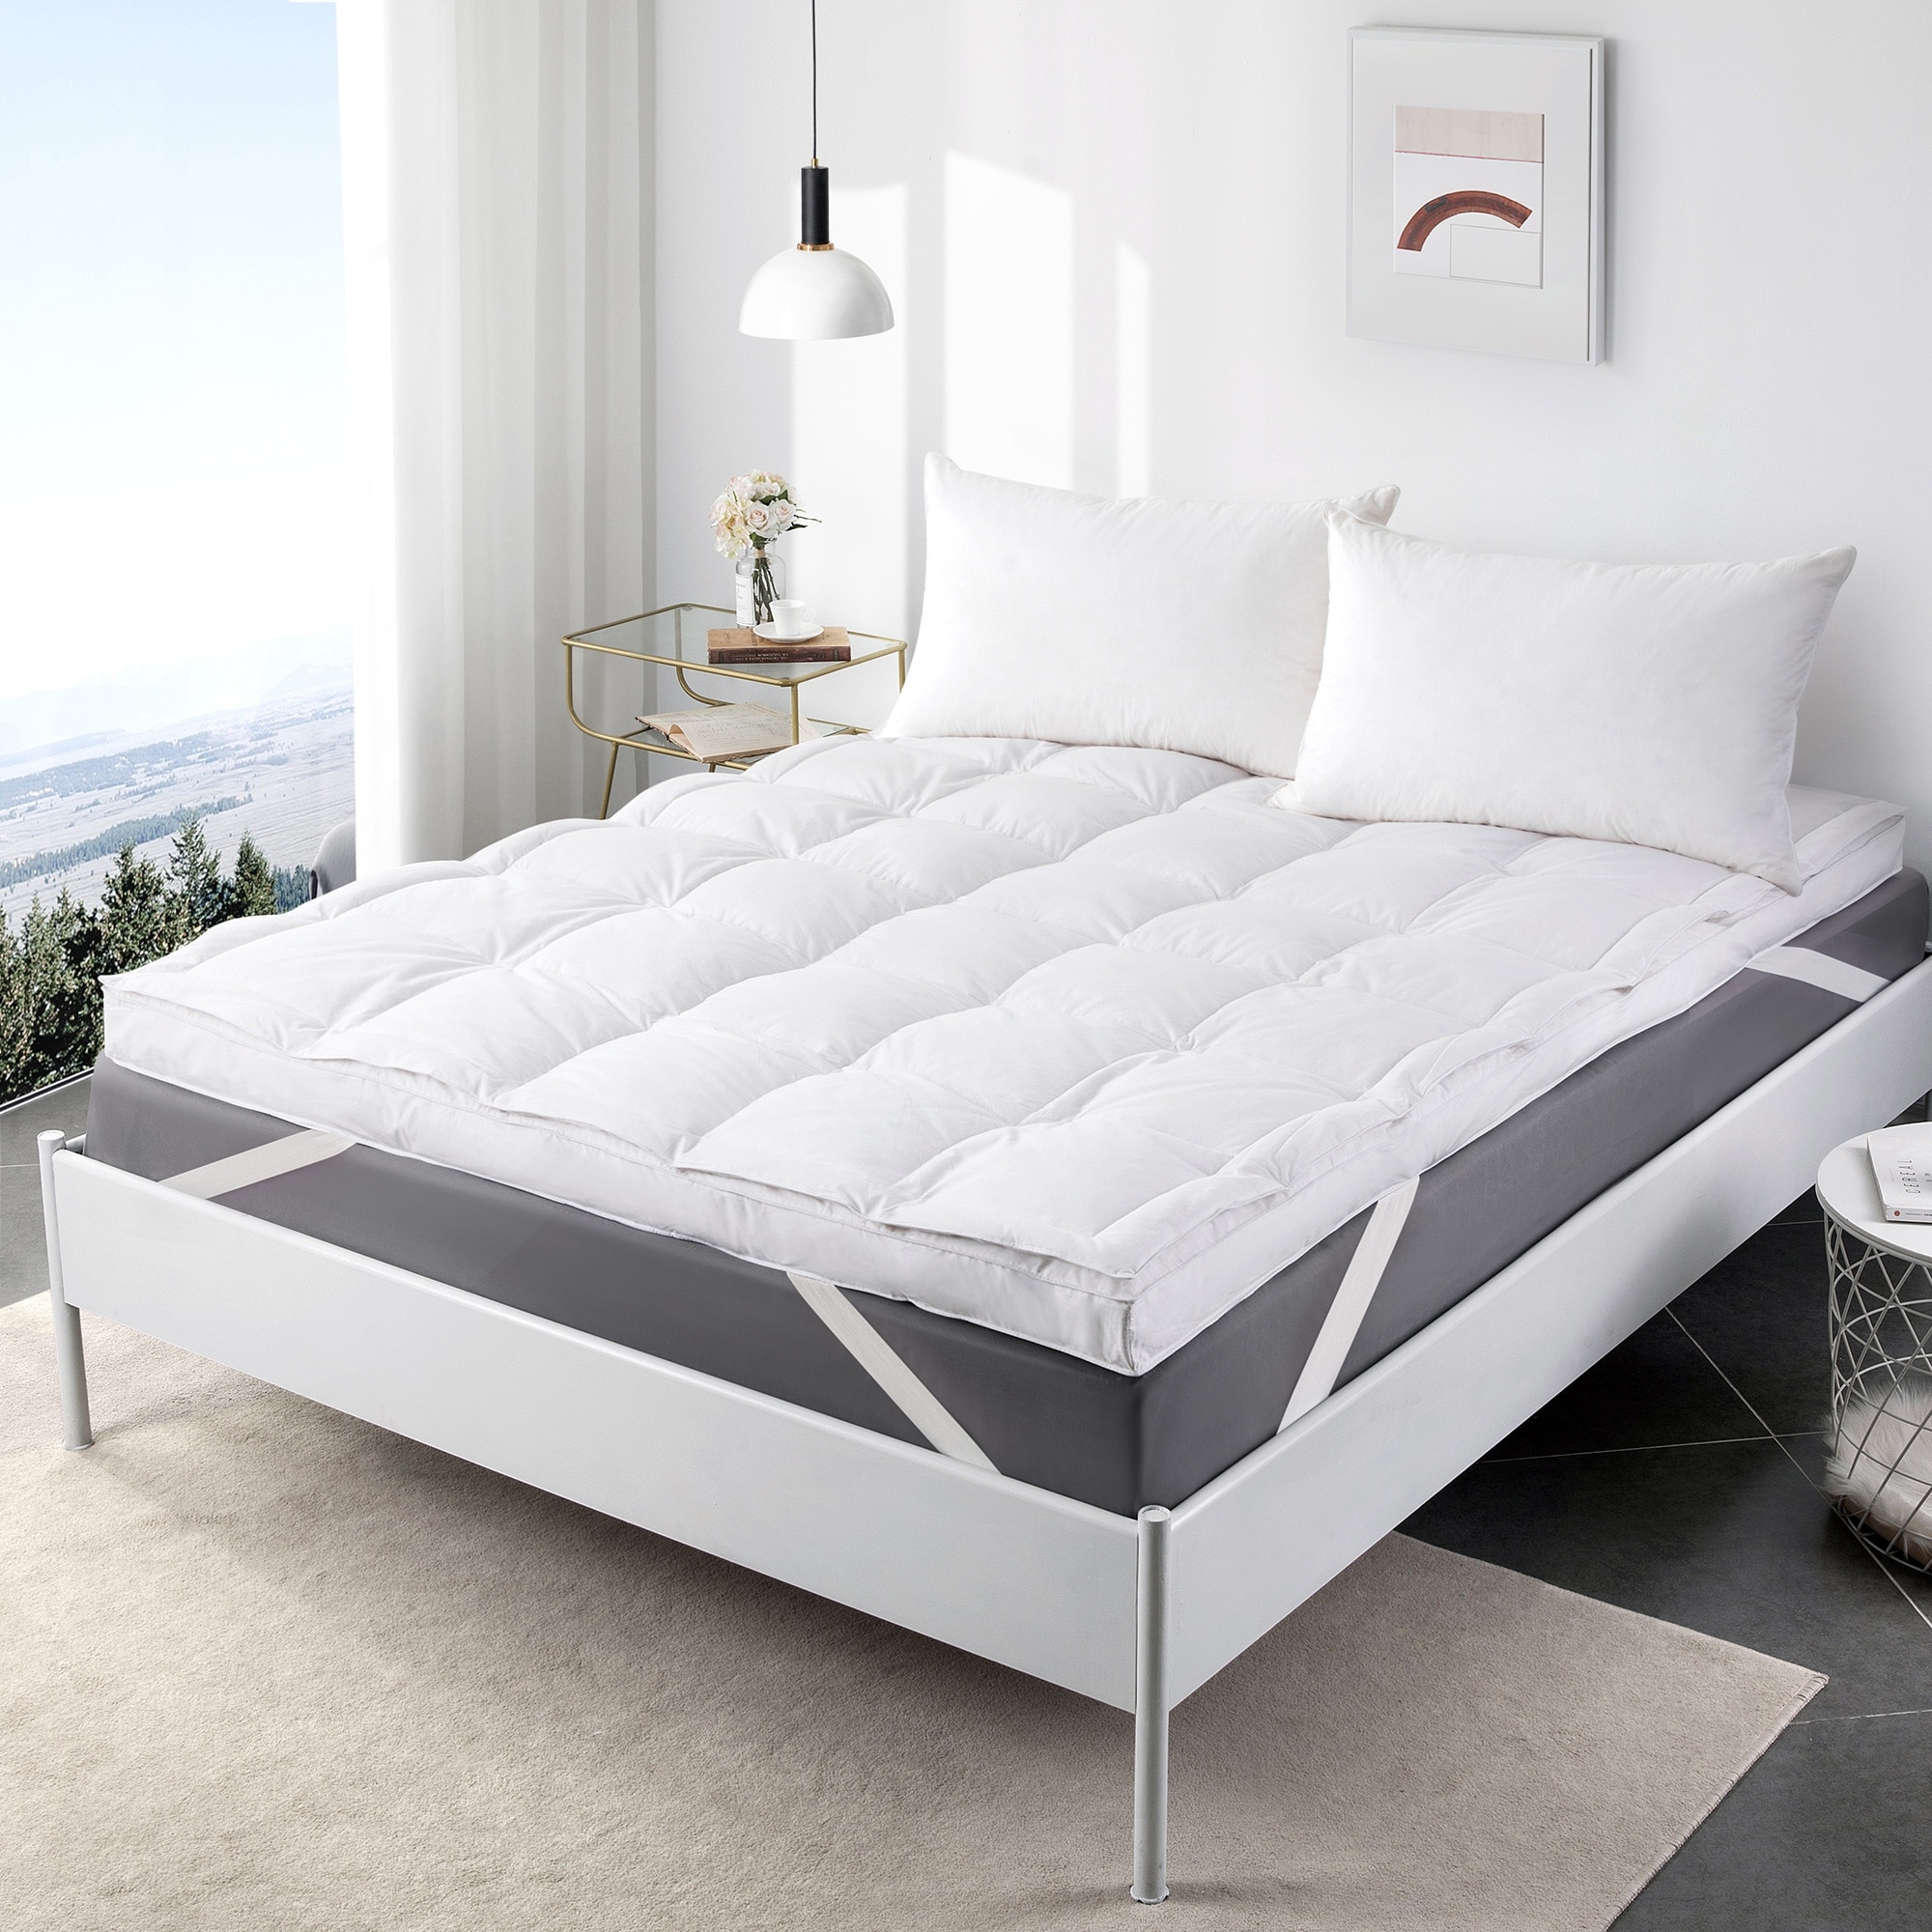 https://ak1.ostkcdn.com/images/products/is/images/direct/827448b755f83a00dba52927209d9607bfe06144/Premium-White-Goose-Feather-Bed-Mattress-Topper-with-Cotton-Cover.jpg